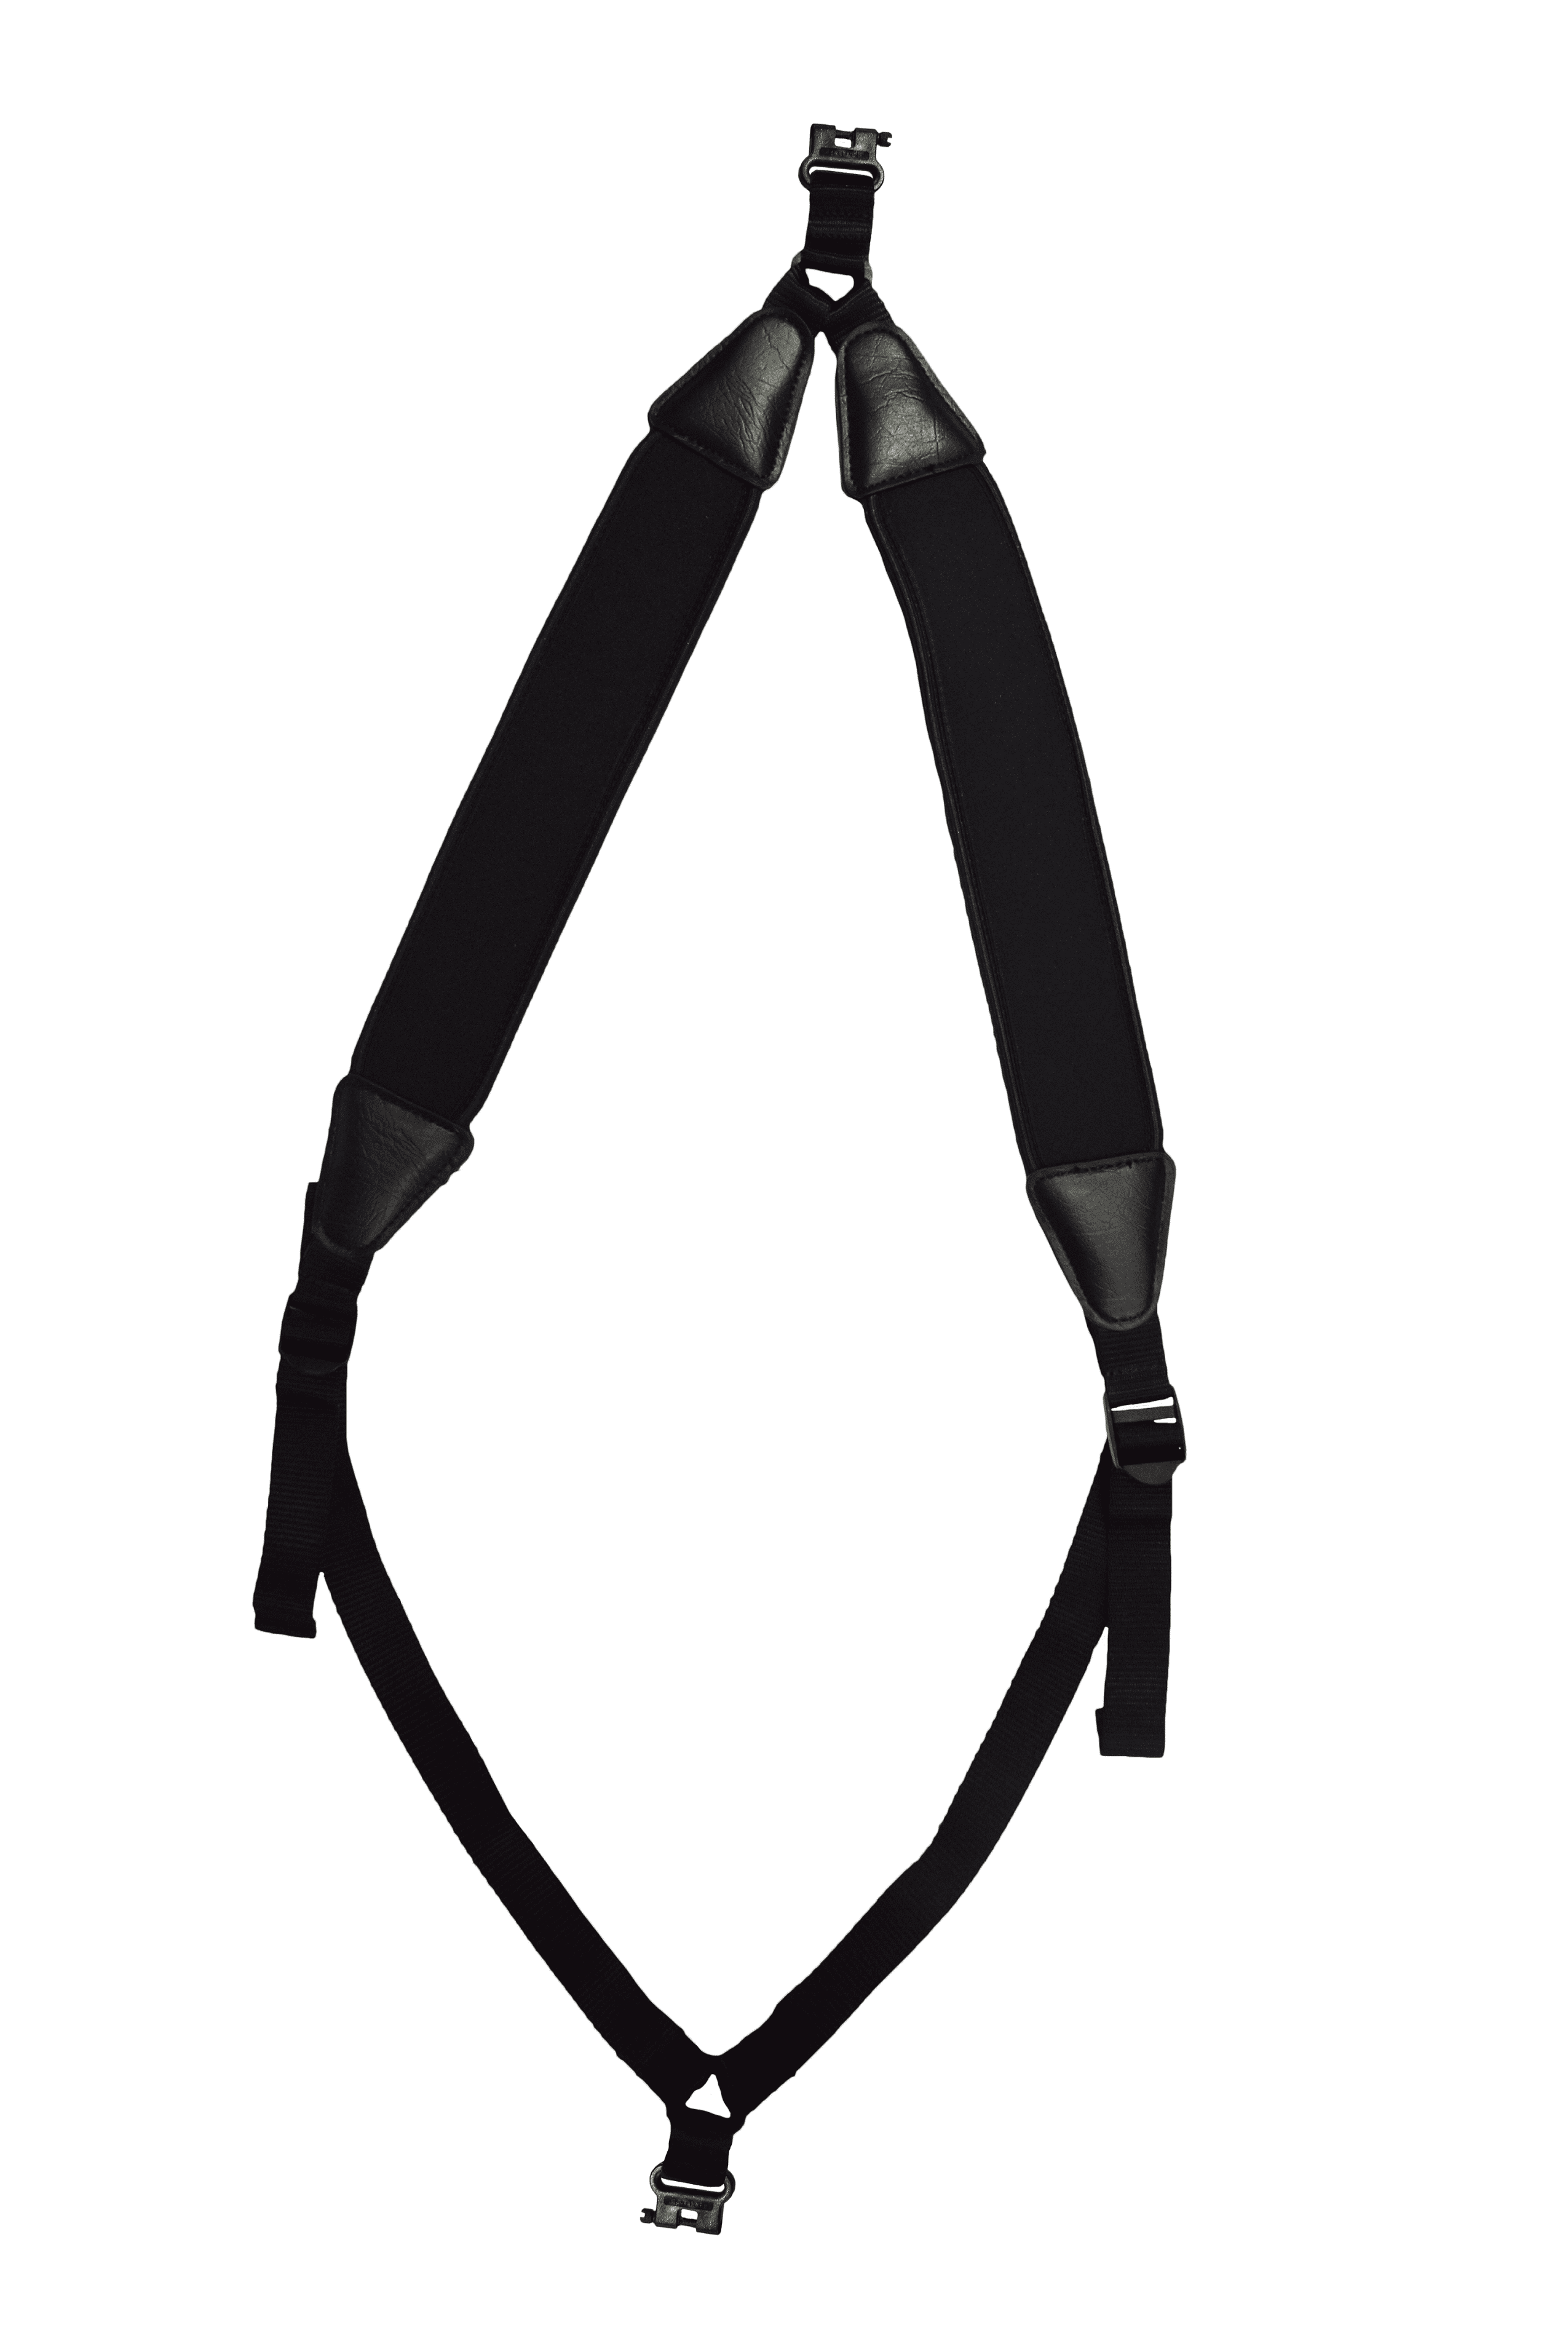 Outdoor Connection Convertible Back Pack Gun Sling w/ Brute E-Z Swivels